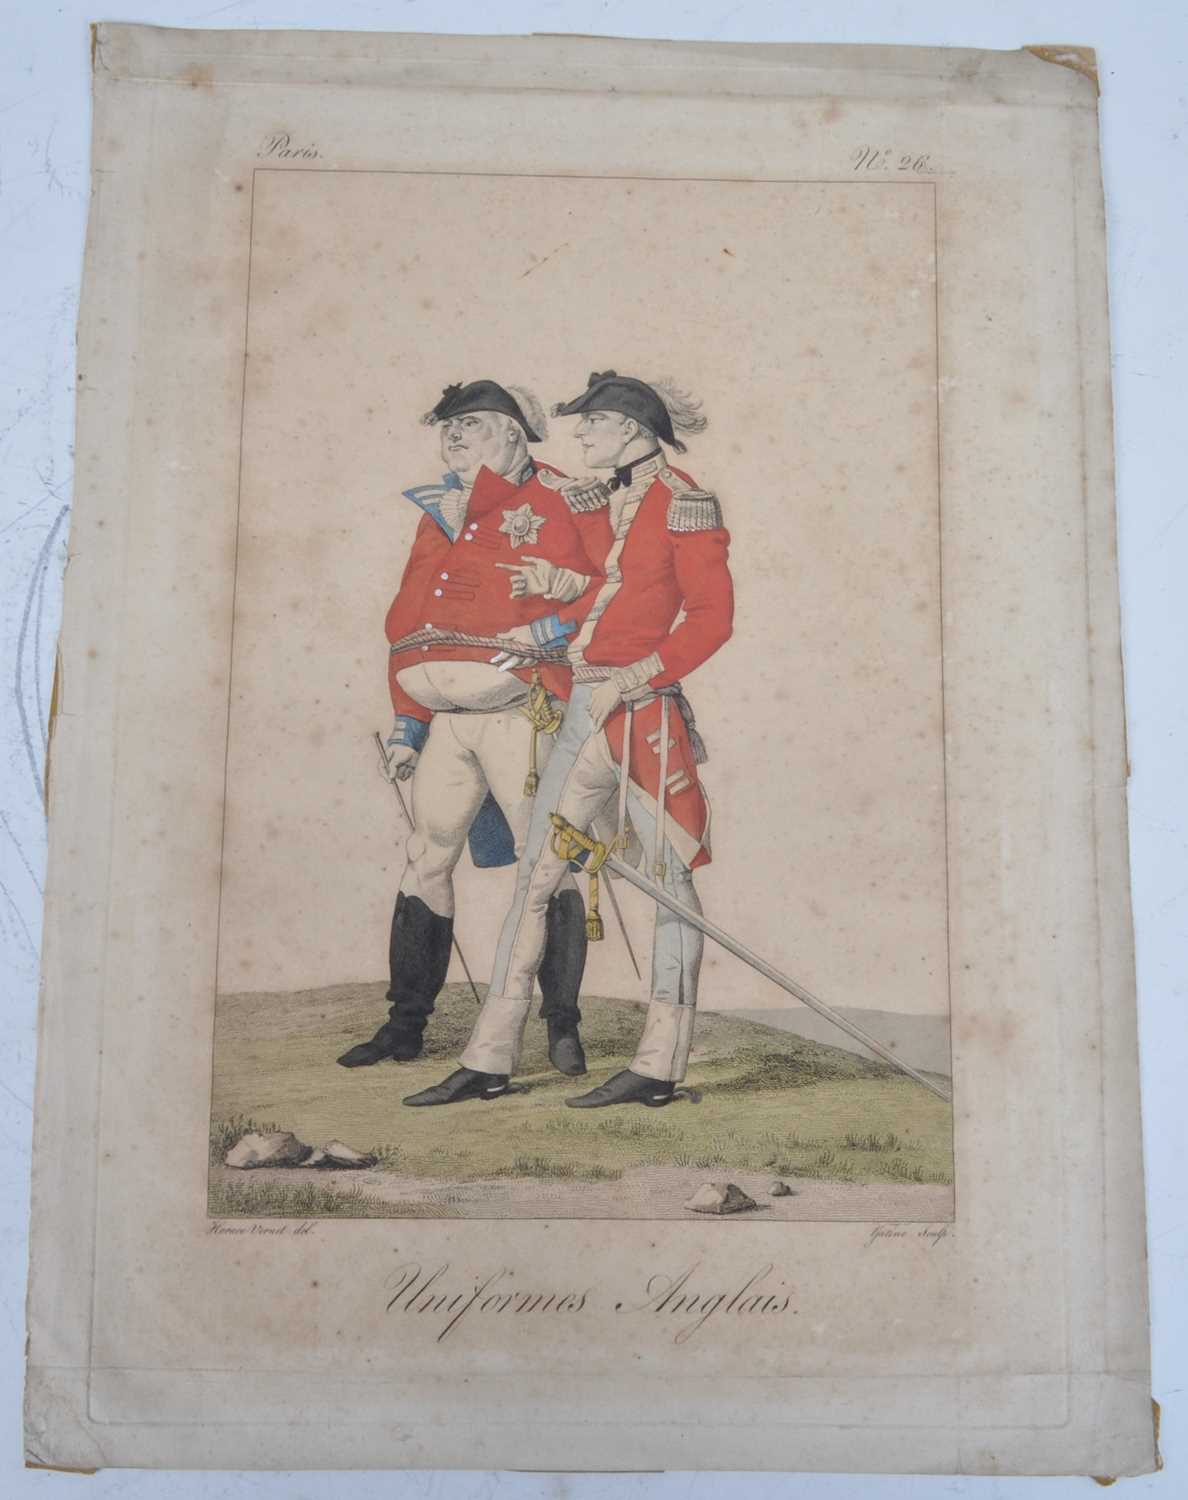 A collection of late 18th/19th century loose engravings, hand-coloured lithographs and sketches, - Image 9 of 9